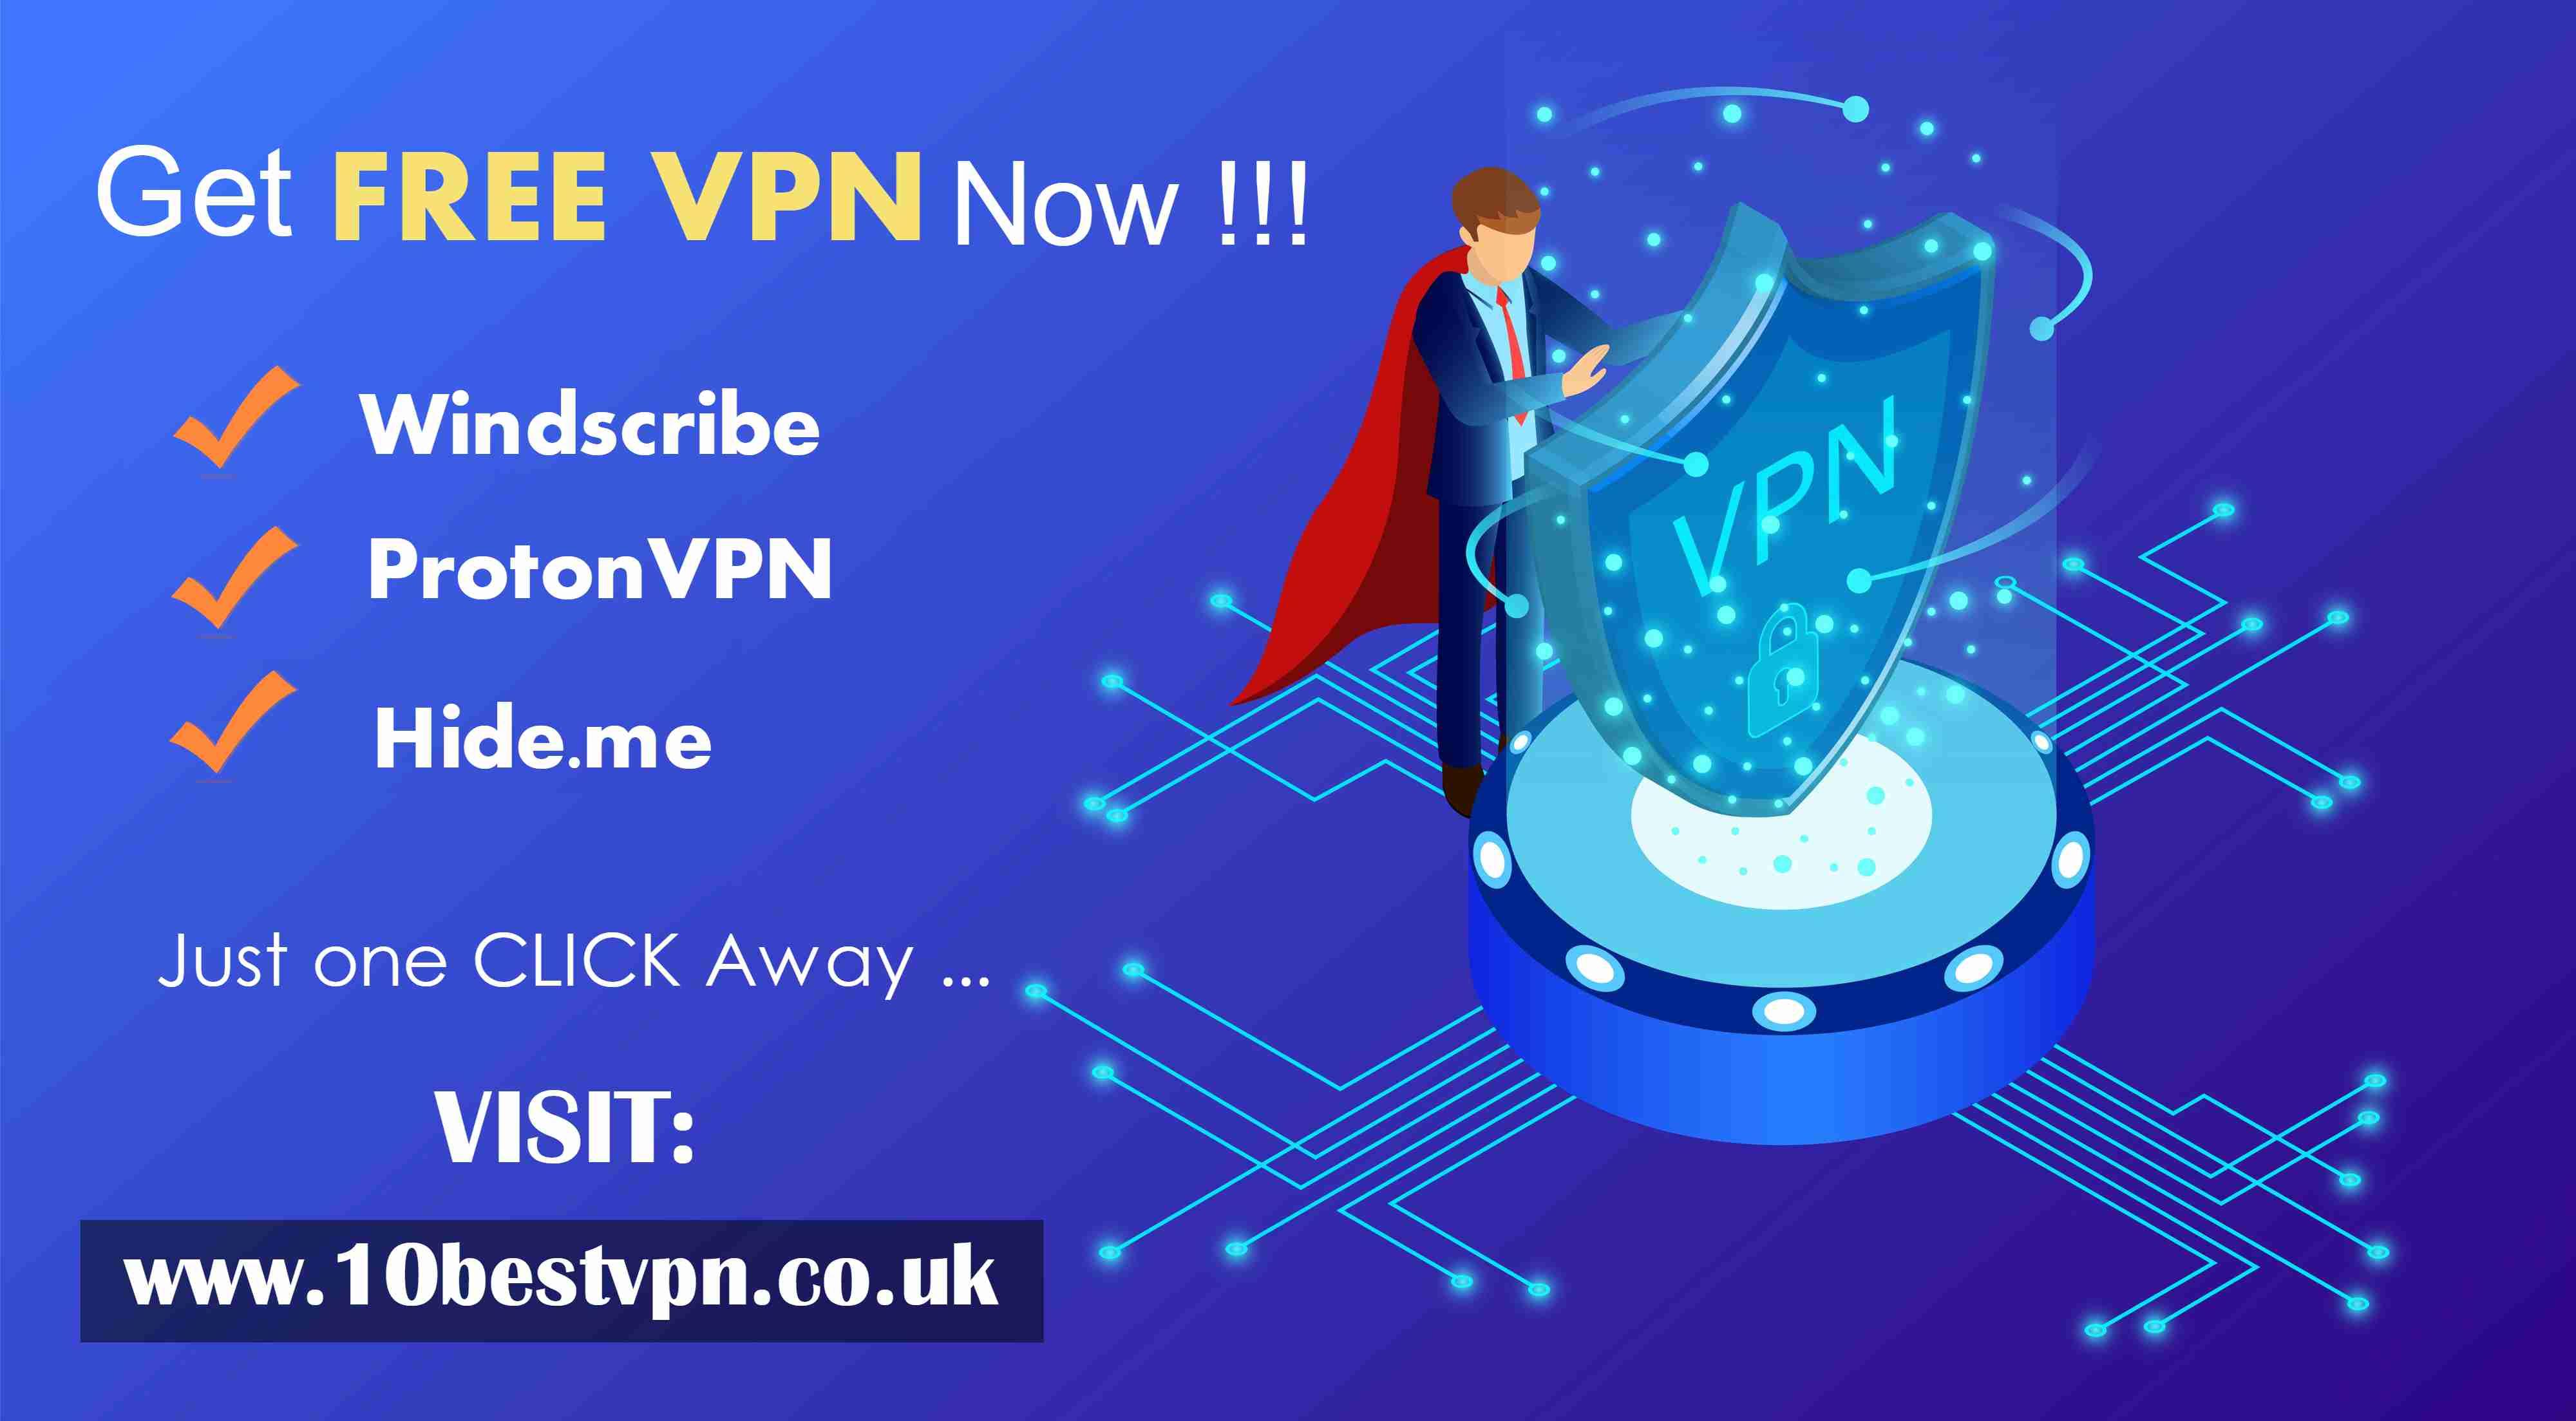 Image - Looking for free VPNs? 10BestVPN have a list of best #freeVPNs that are capable to give you secured connectio...